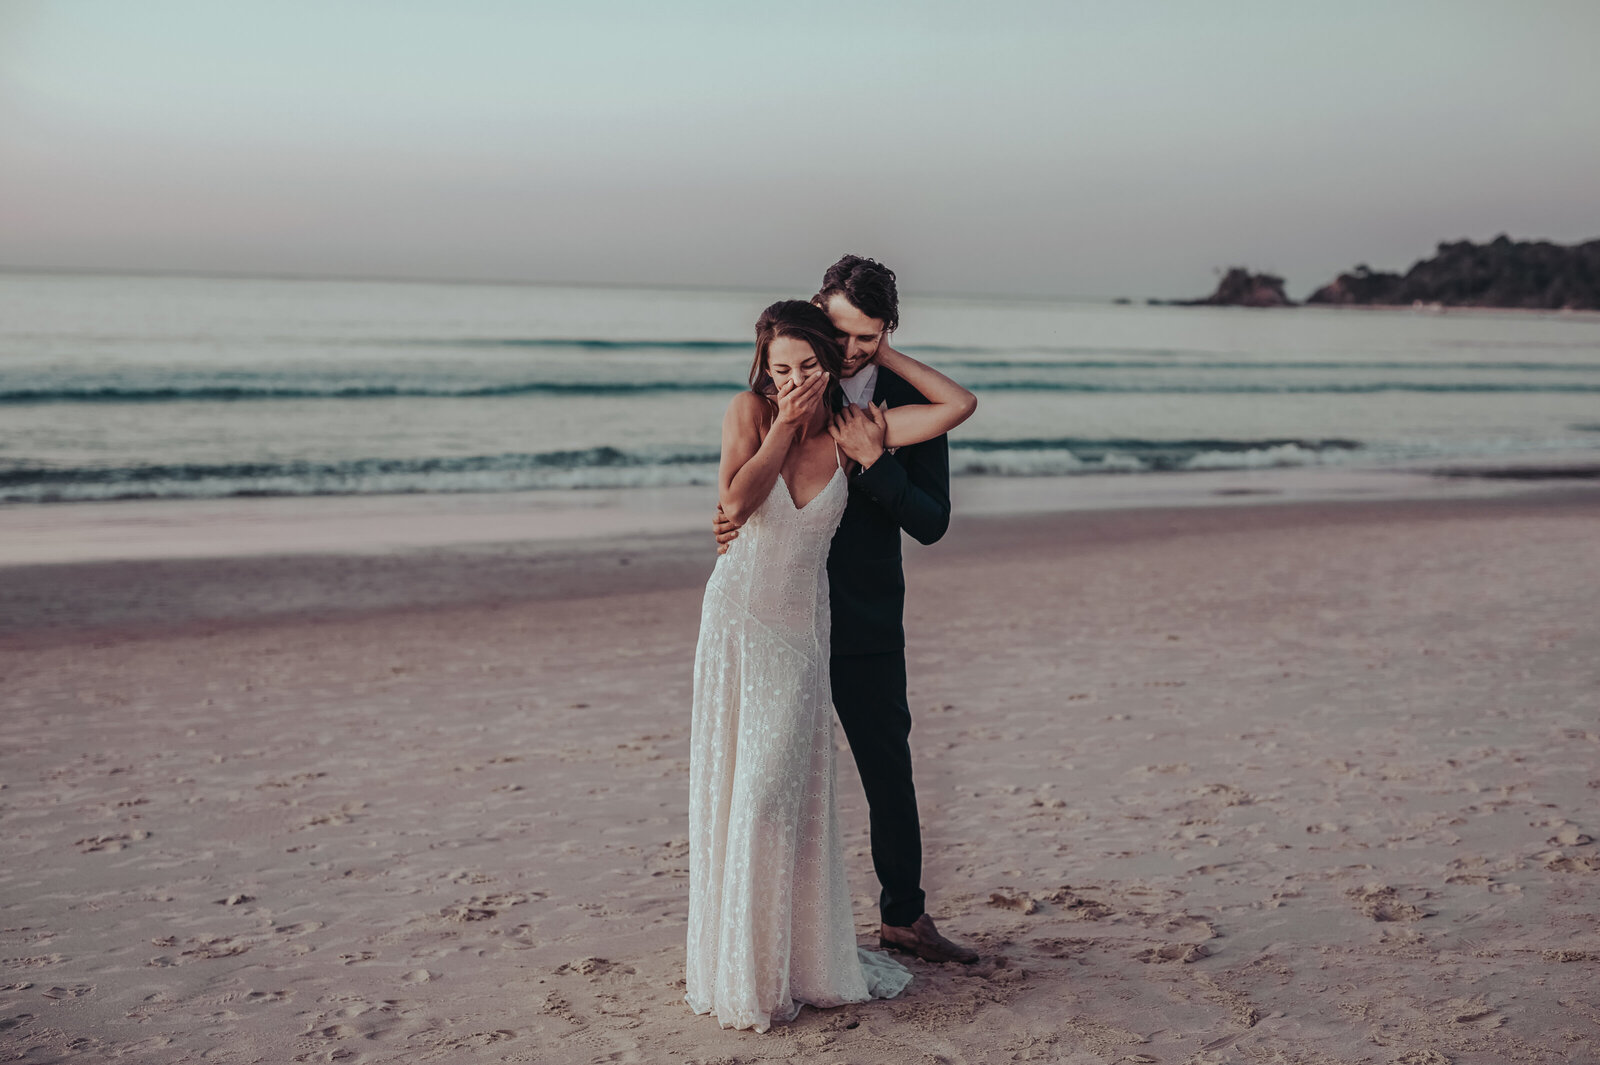 Romantic bride and groom photoshoot at seaside